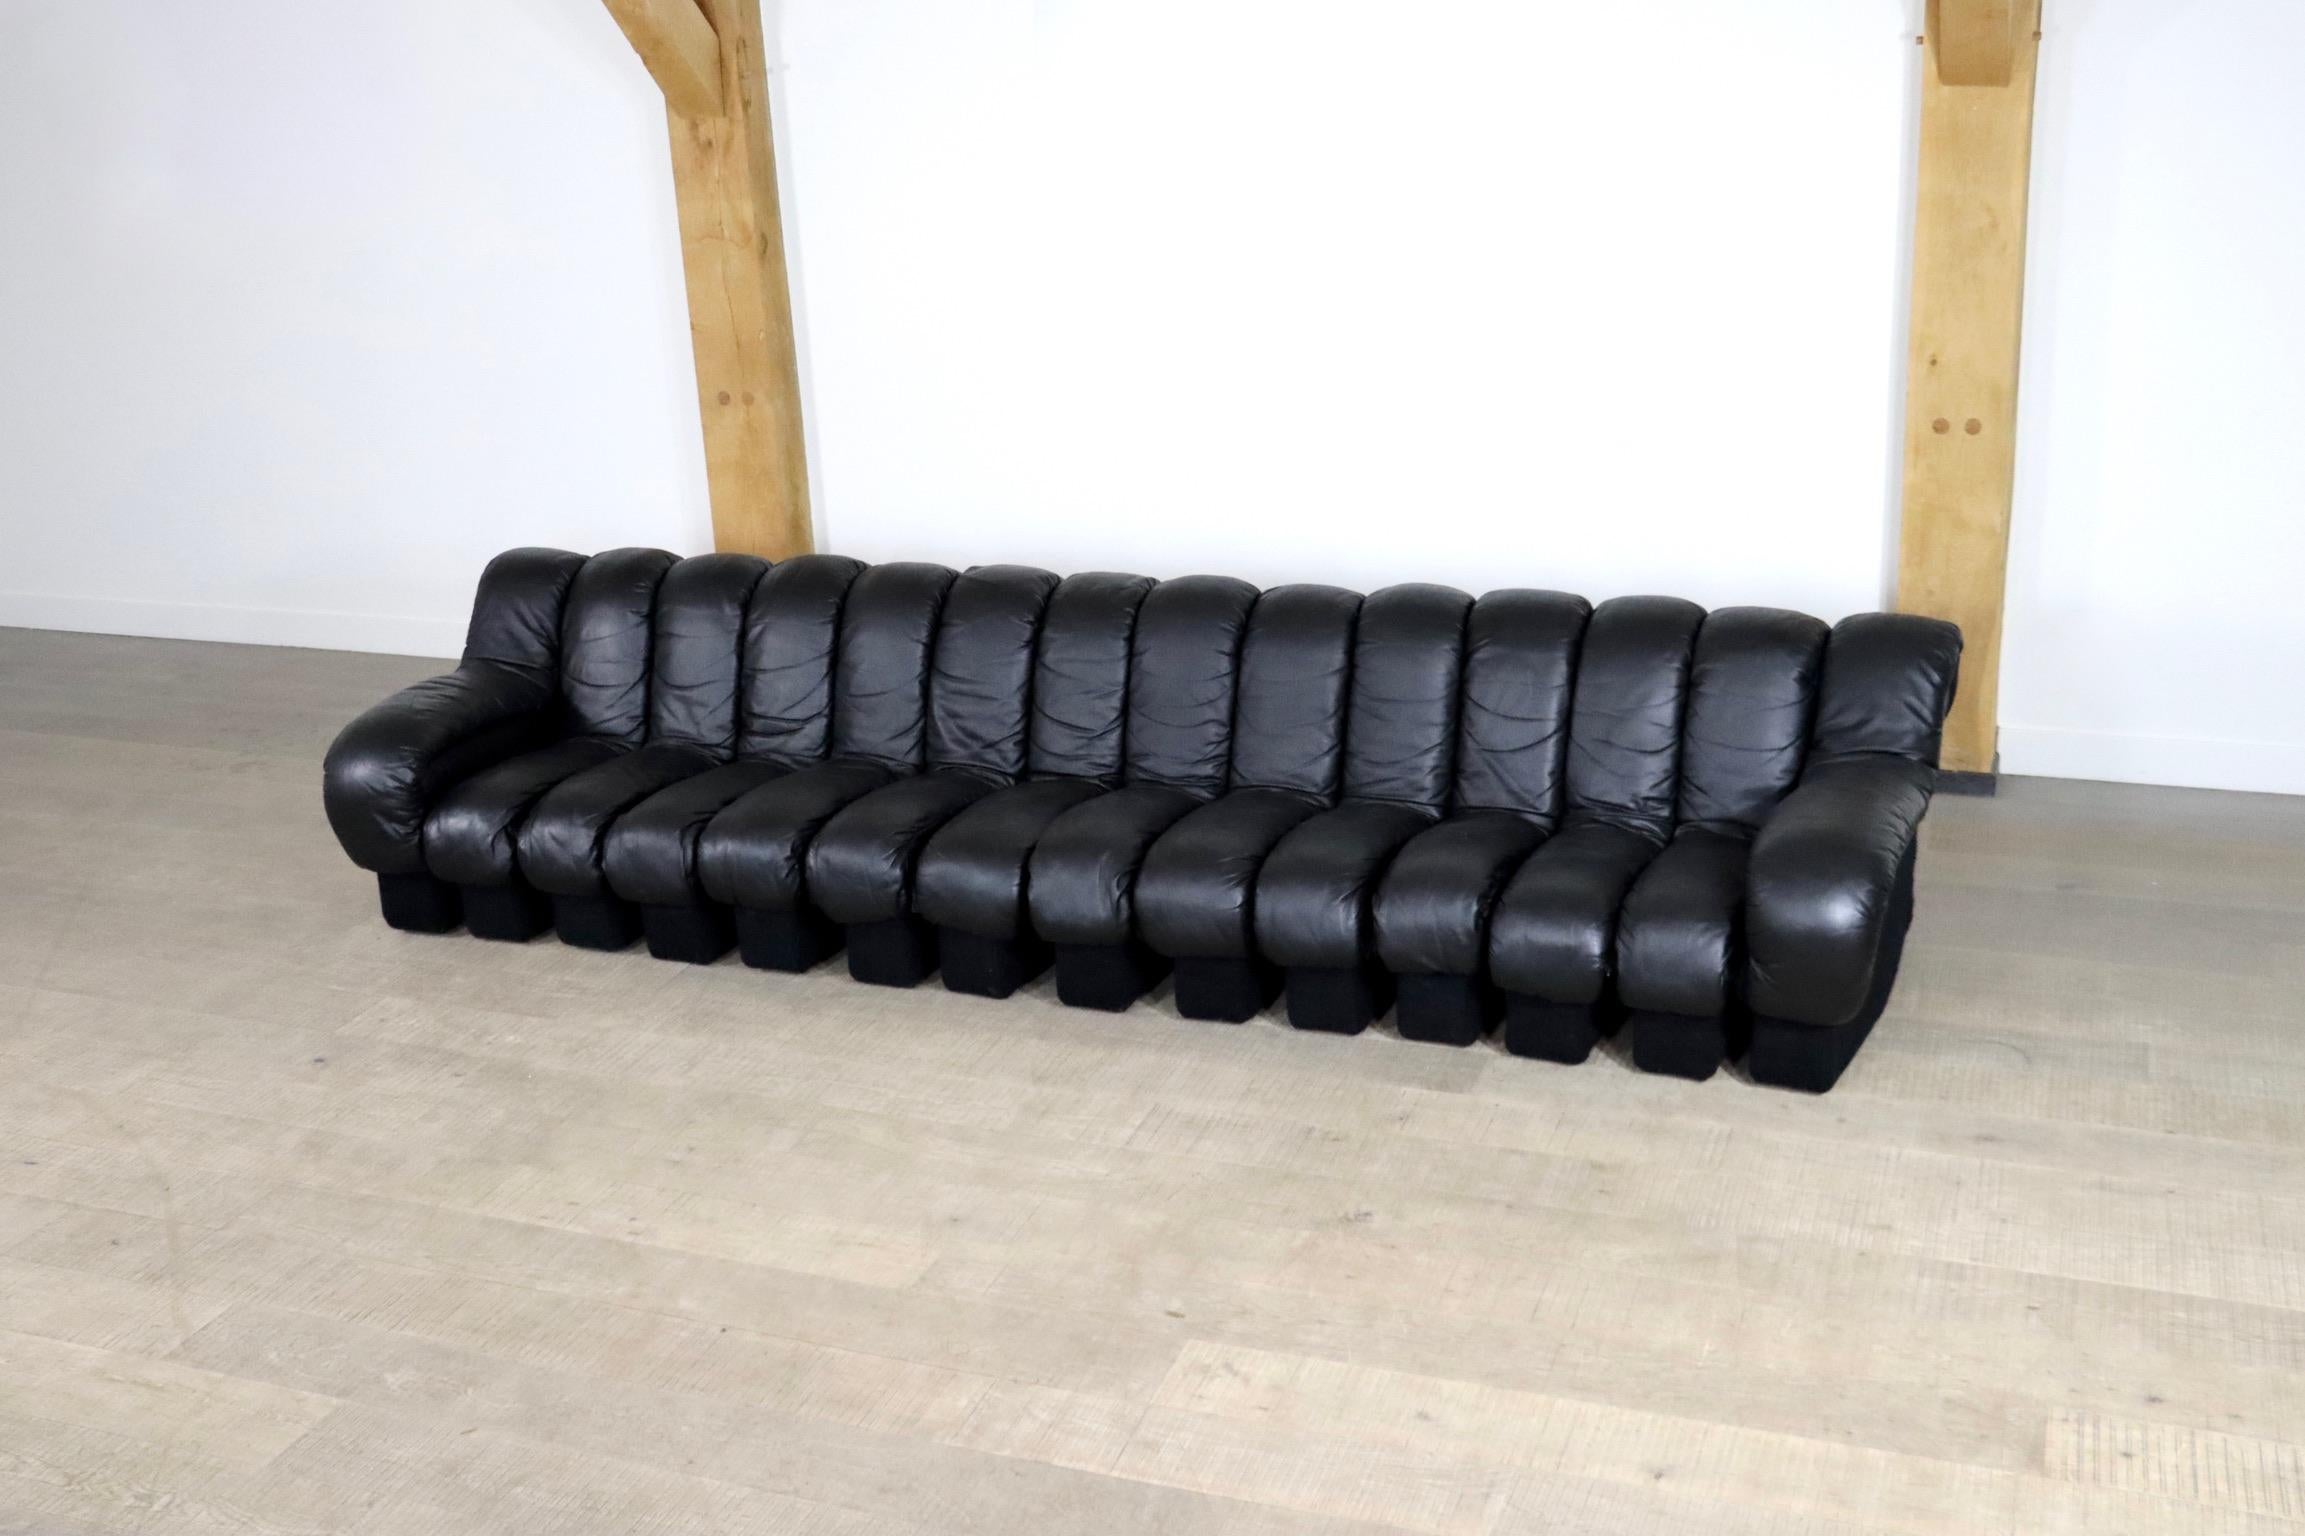 Incredible De Sede DS 600 “Non-Stop” sectional sofa by Heinz Ulrich, Ueli Berger and Eleonore Peduzzi-Riva. This nice black leather is used on the seating and bases are upholstered in felt. The sofa consist of 14 pieces, all of which hook and zip